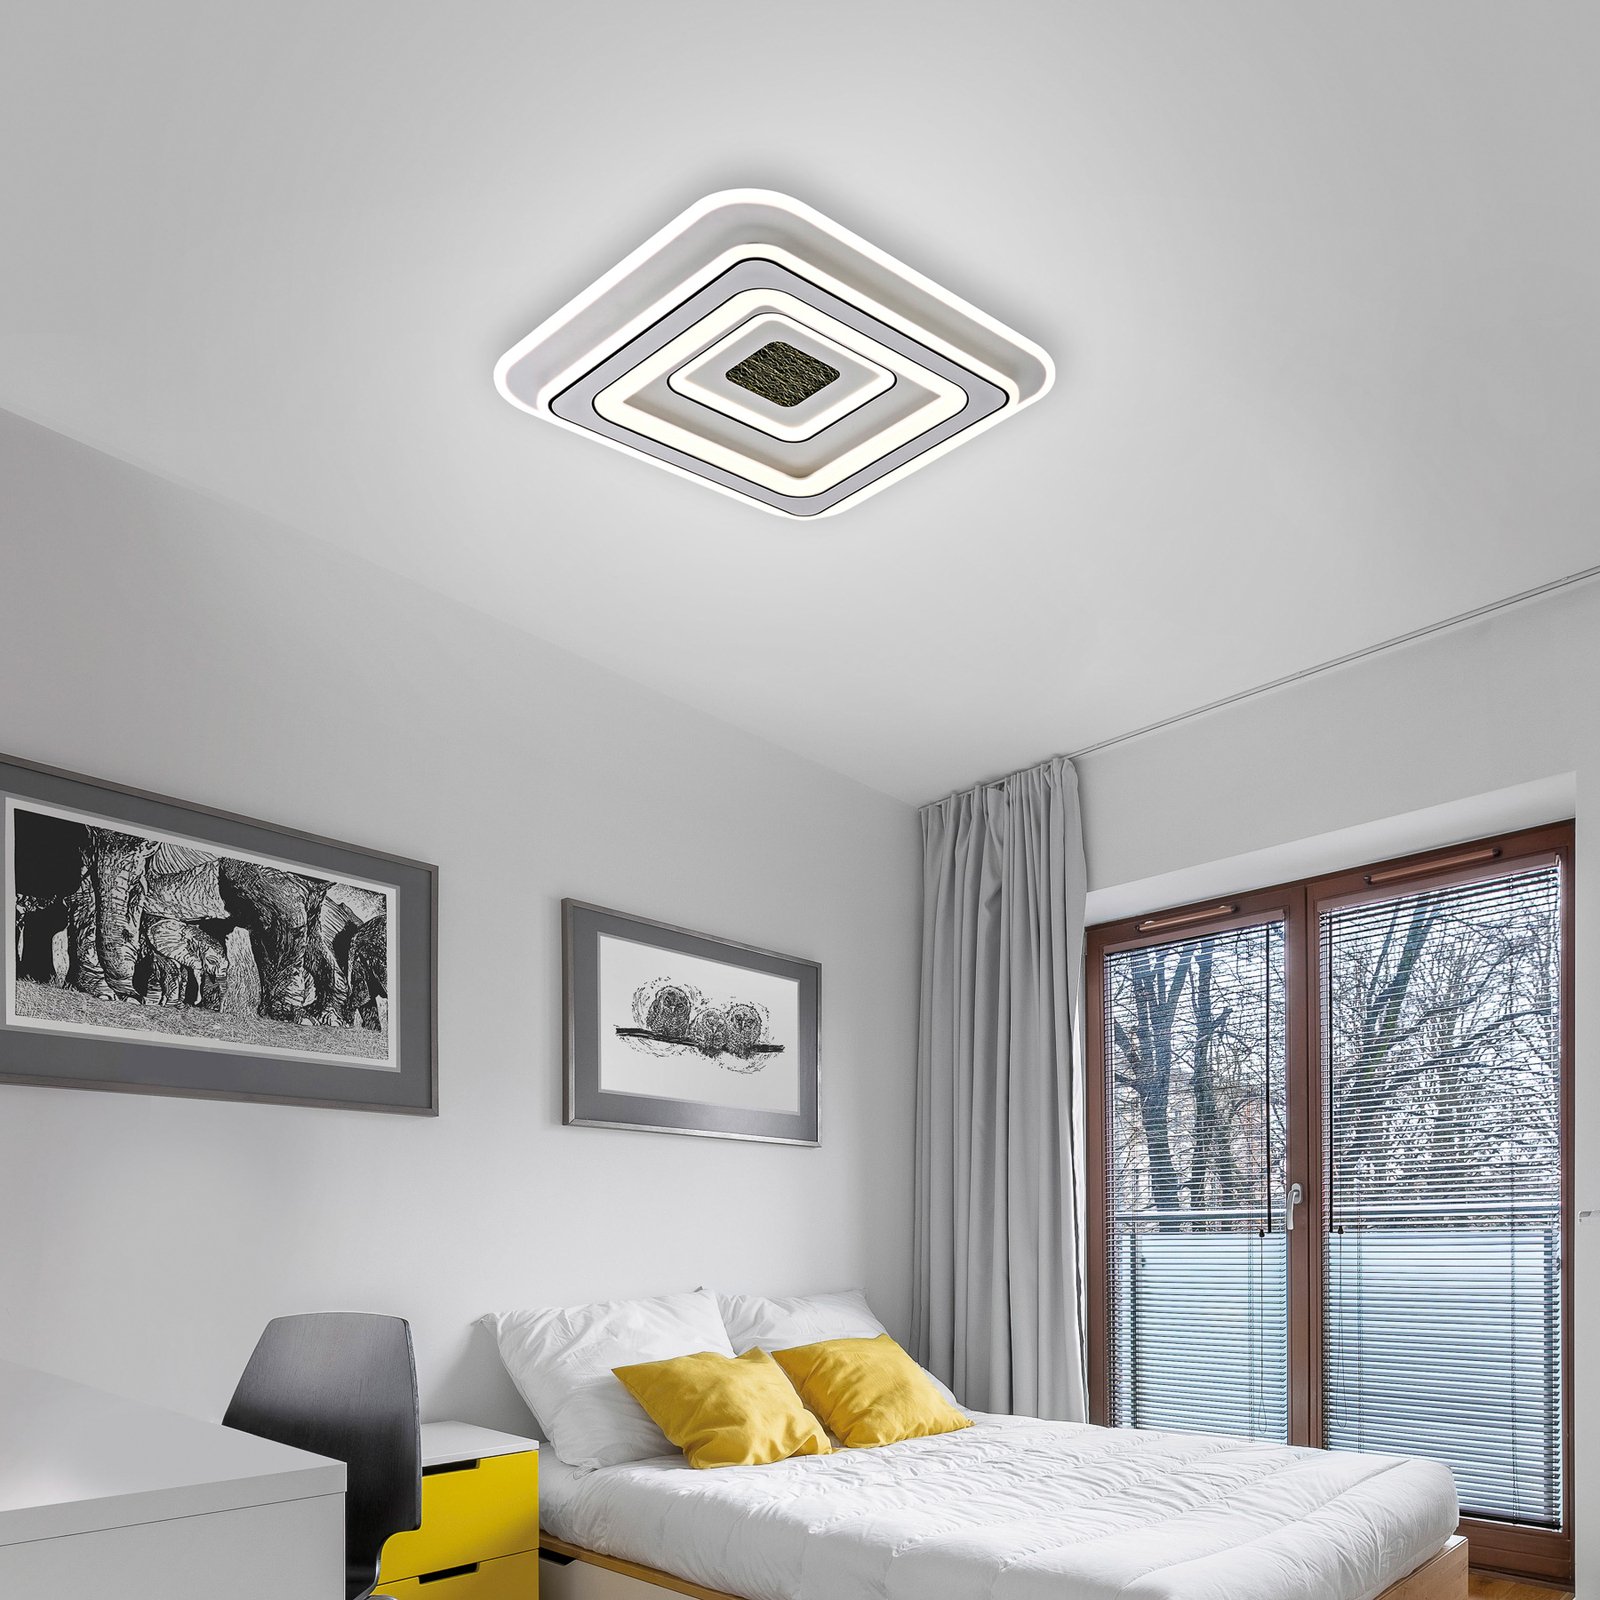 JUST LIGHT. LED ceiling light Tolago, 49x49 cm, CCT, dimmable